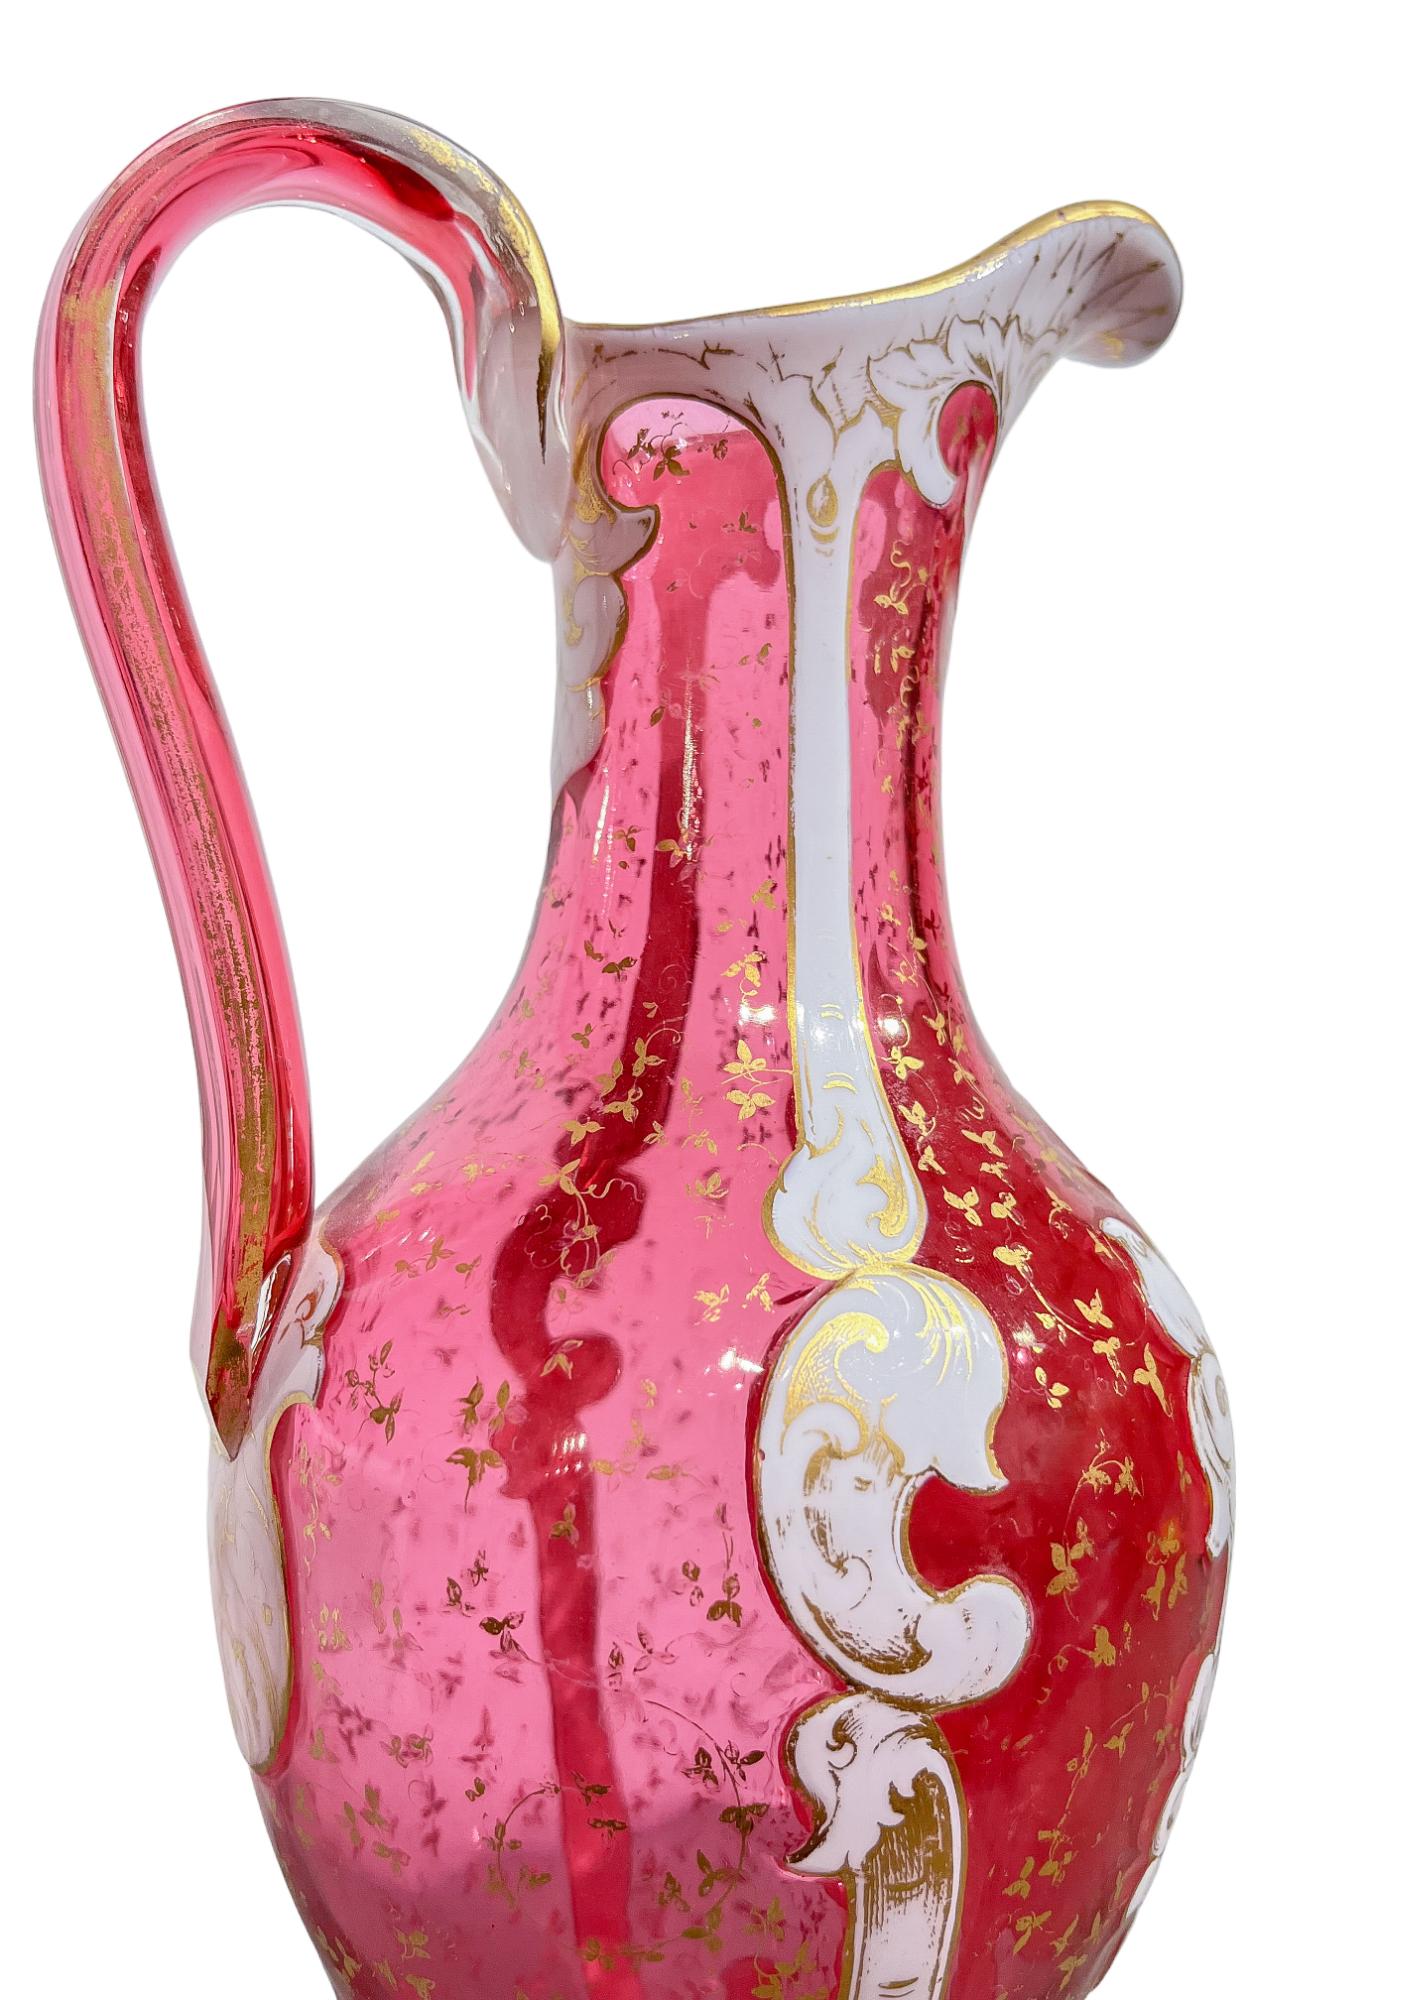 Enameled  Bohemian Glass Pitcher with Jewel Painting and White Enamel  For Sale